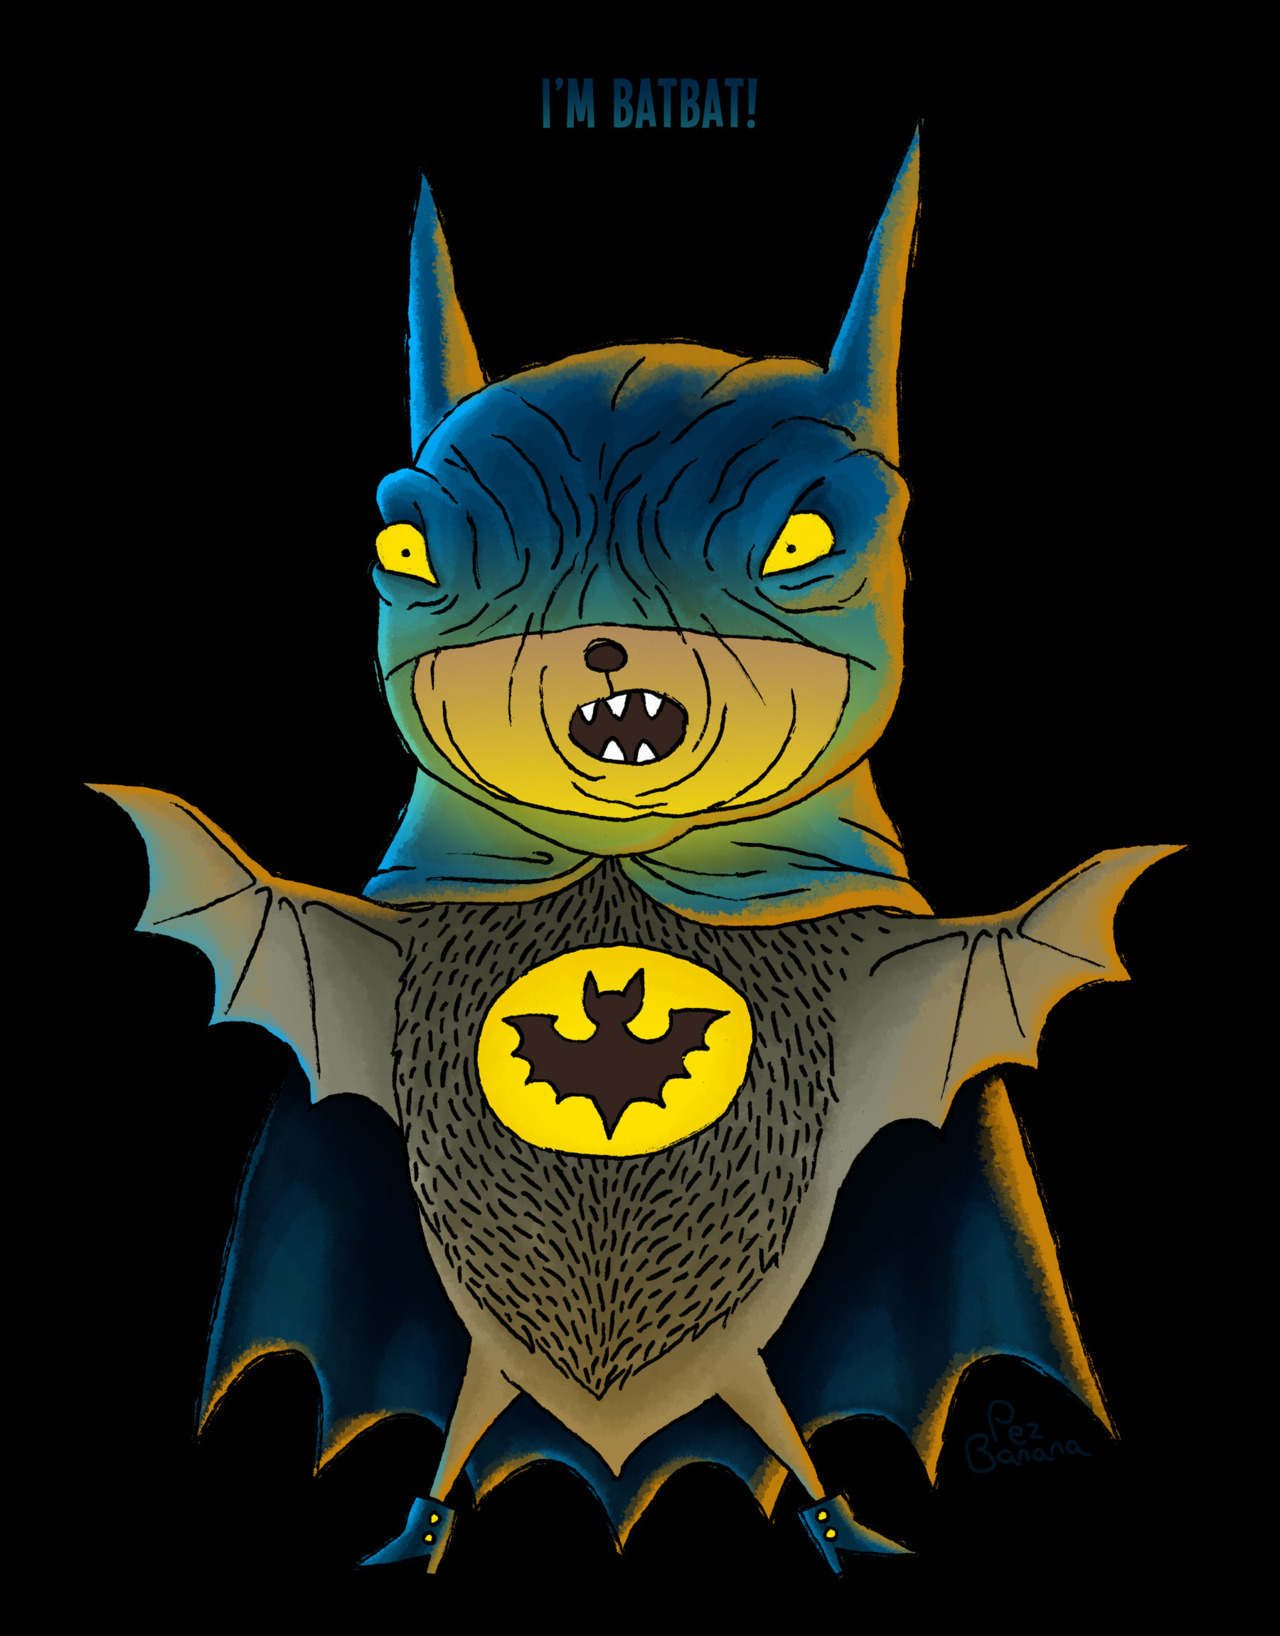 What kind of bat&hellip; spends his days dressed up as a bat? - By PEZ BANANA    @ Tumblr / @ deviantart